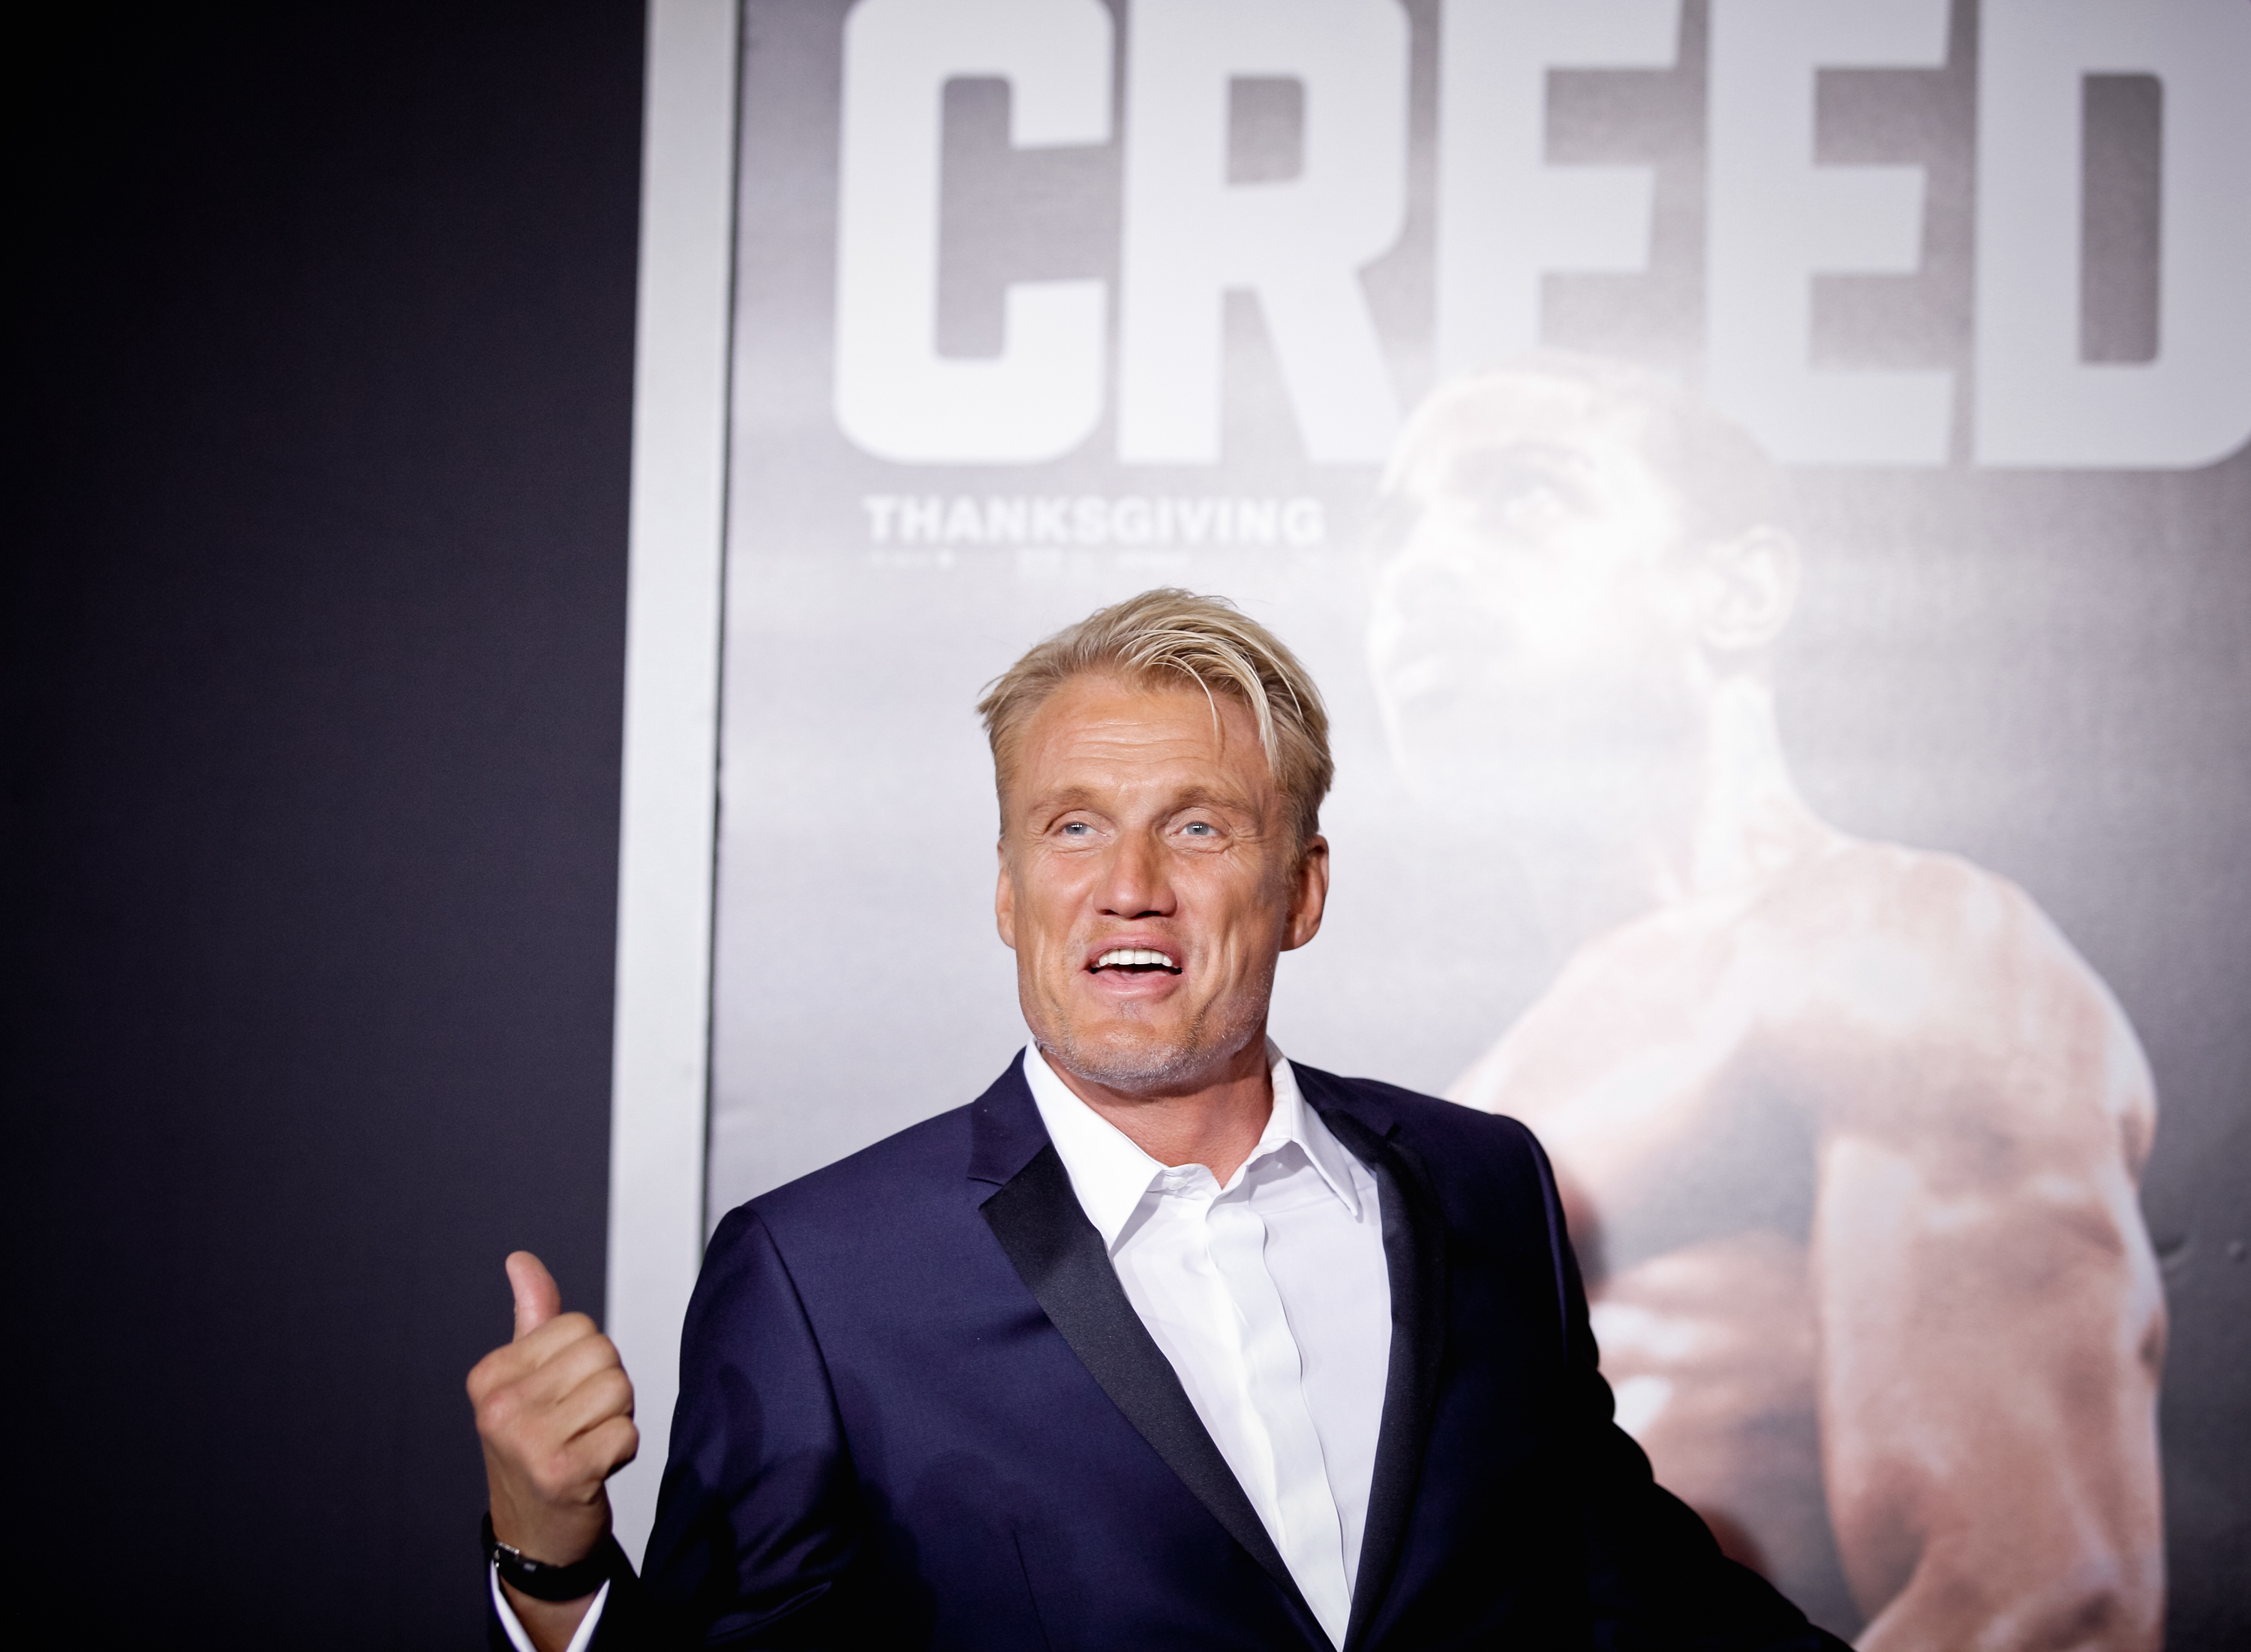 Premiere Of Warner Bros. Pictures’ “Creed” - Arrivals